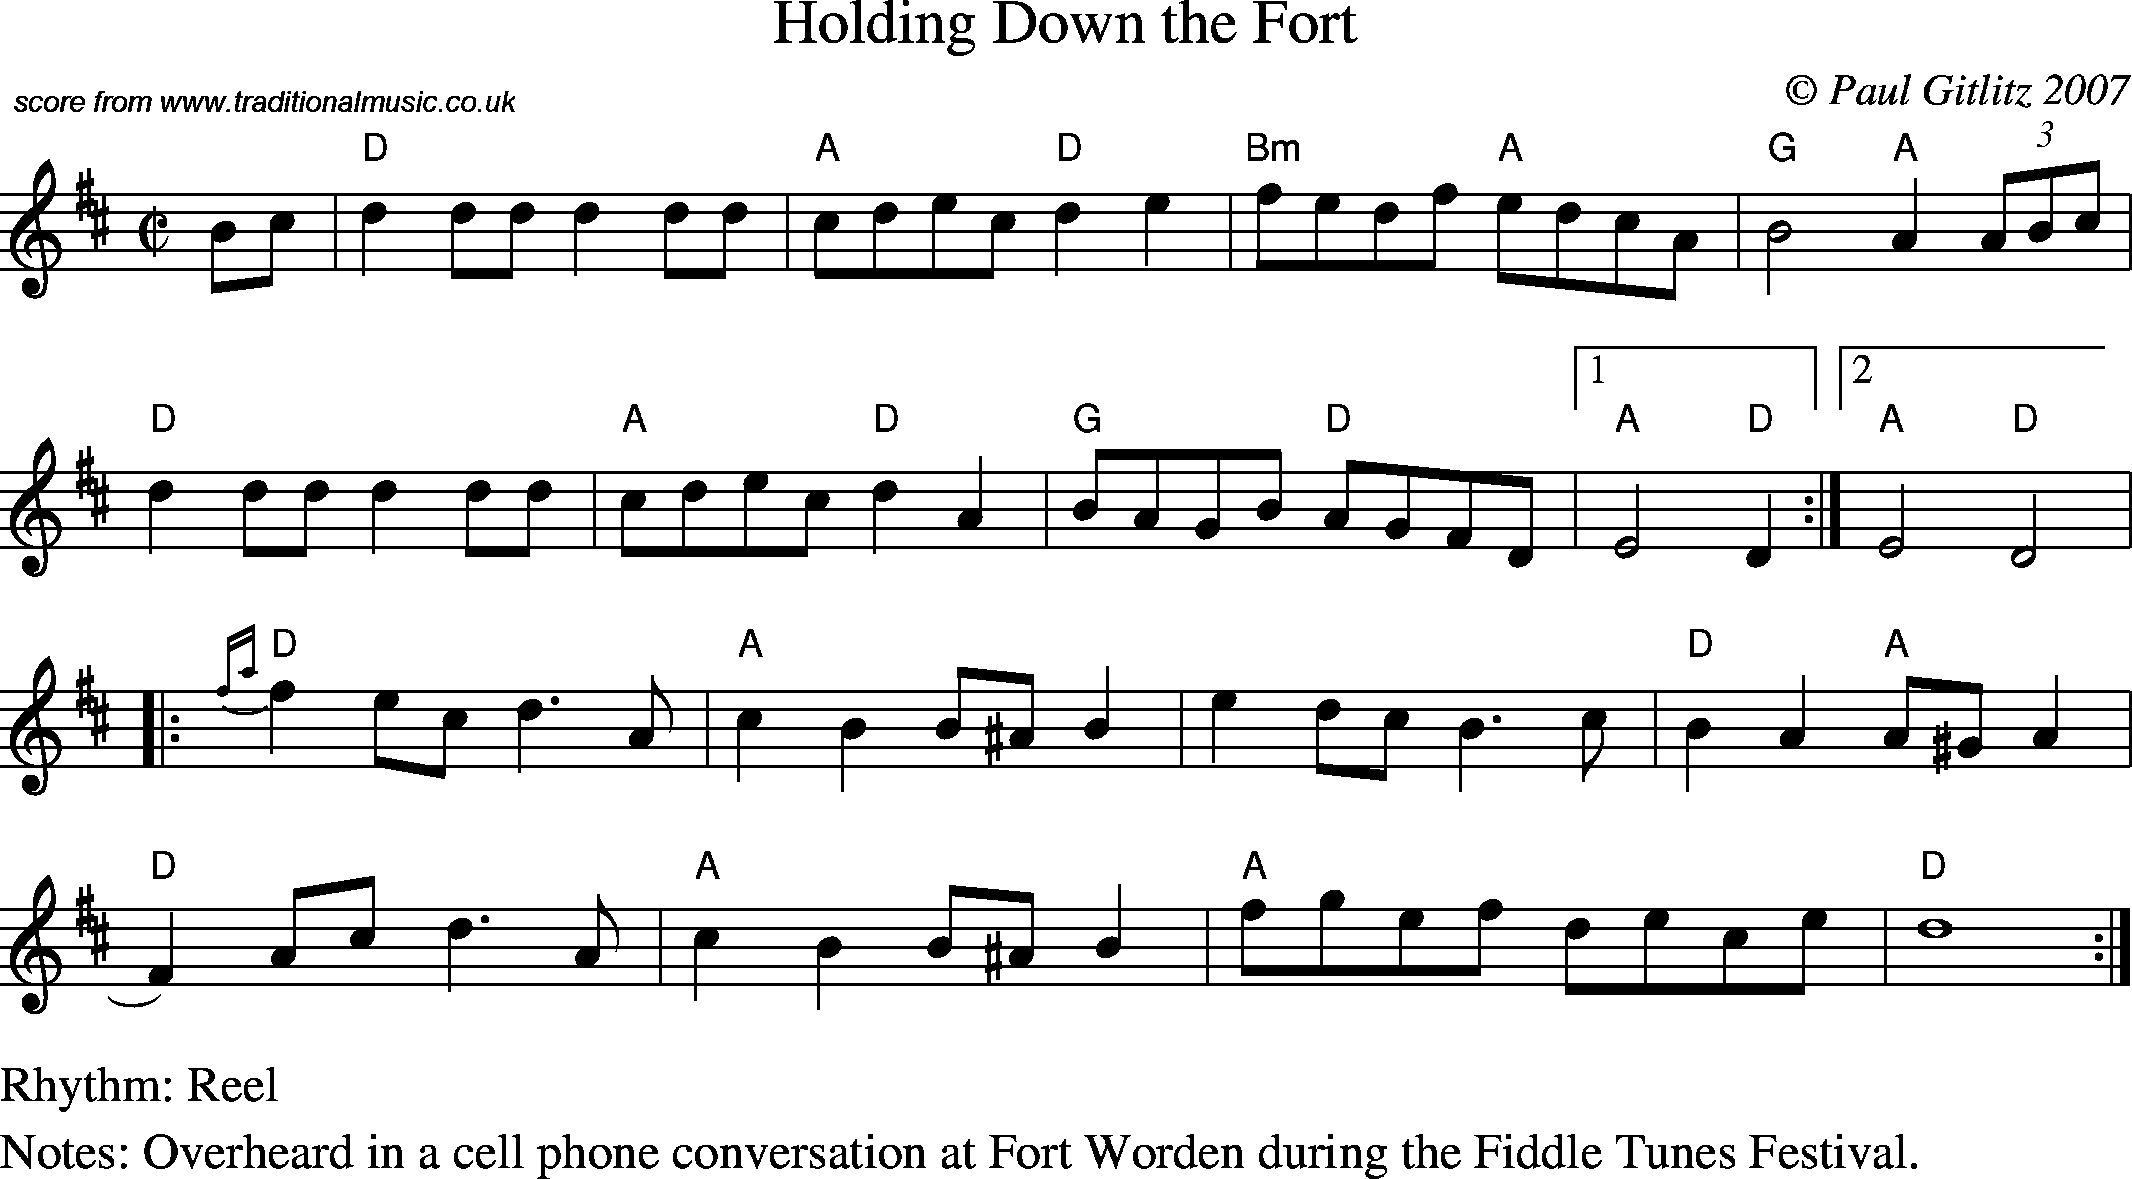 Sheet Music Score for Reel - Holding Down the Fort